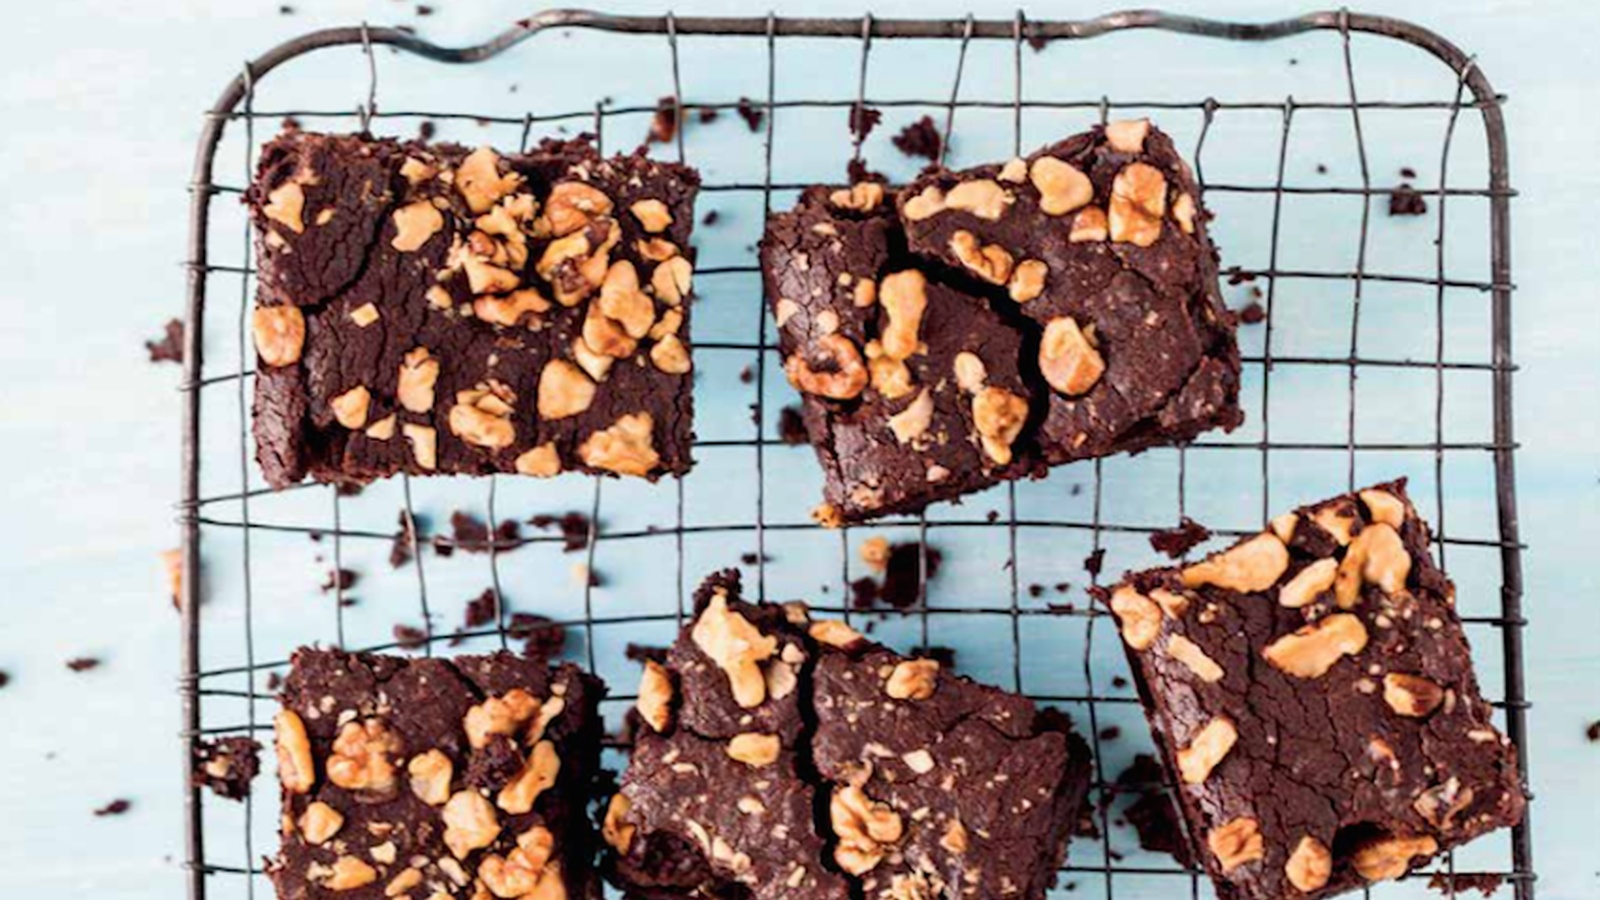 Our Favorite Healthy Baking Recipes